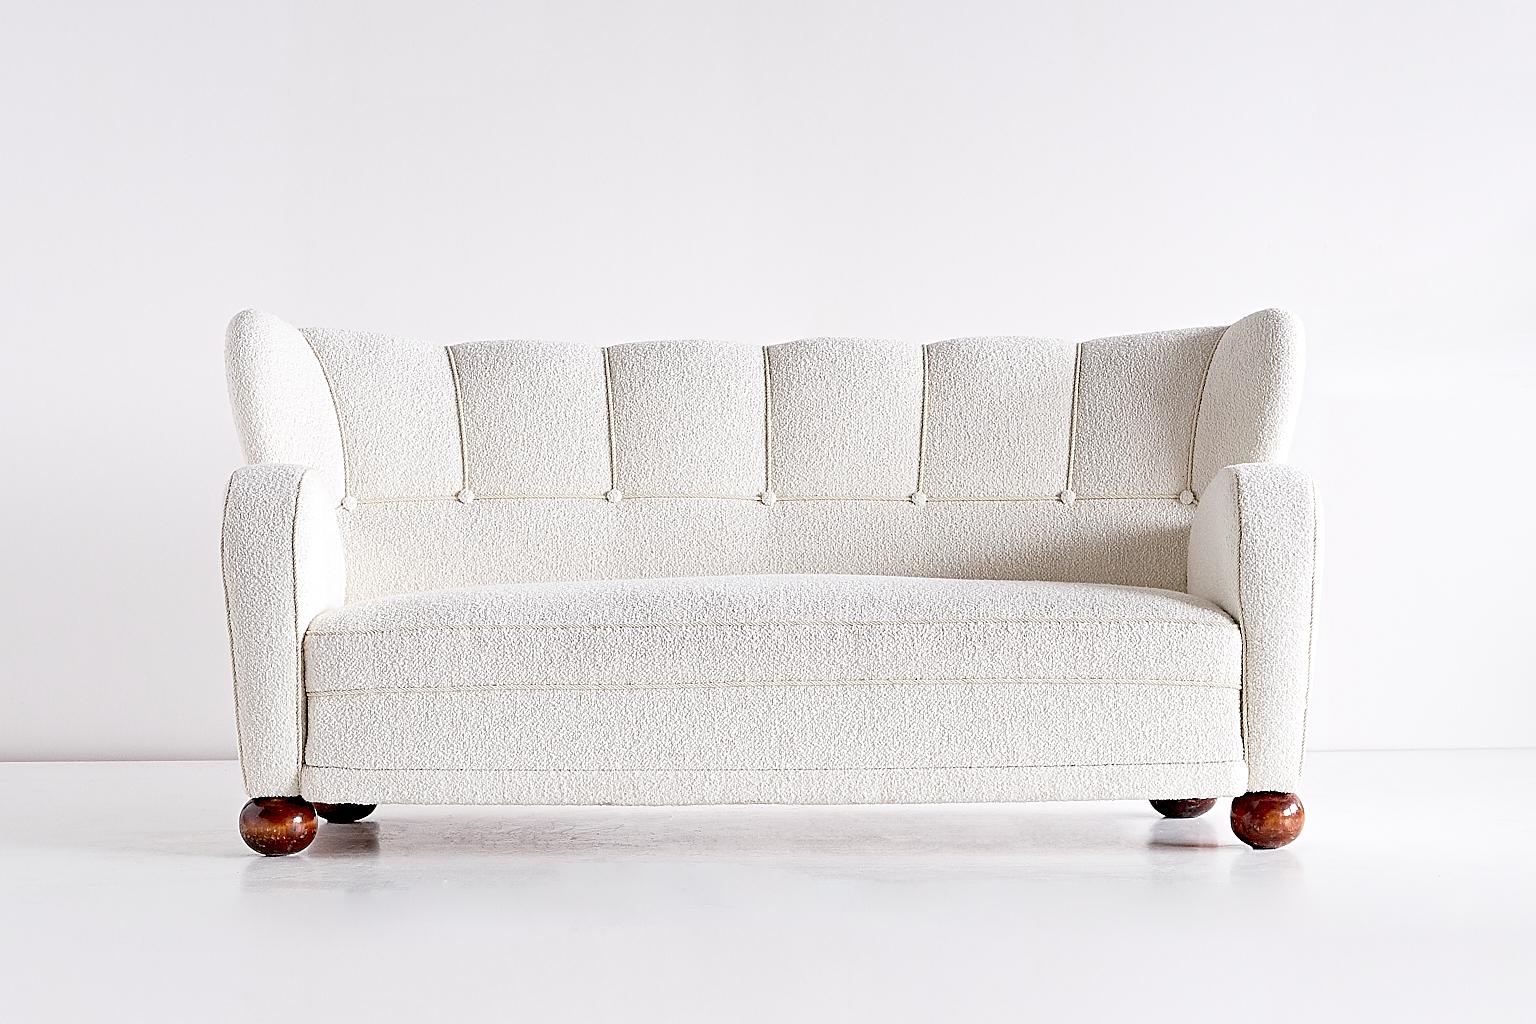 This rare sofa was designed by Märta Blomstedt and produced in Finland in the 1940s. The sofa has been fully reconditioned and newly upholstered in a white bouclé fabric. 
One of the driving forces of the Finnish functionalism movement, the